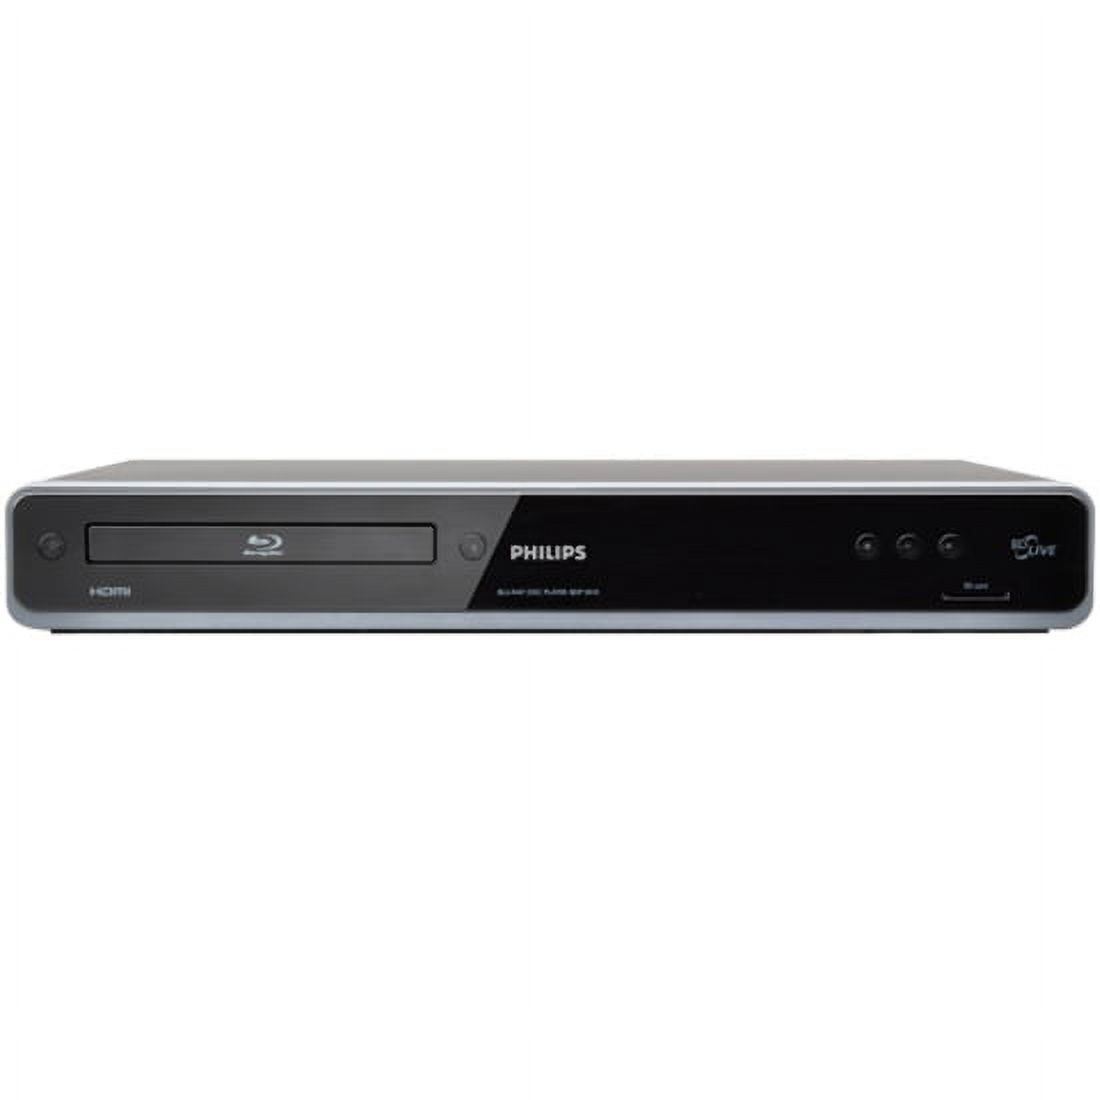 Philips BDP5010 Blu-ray Disc Player - image 1 of 1